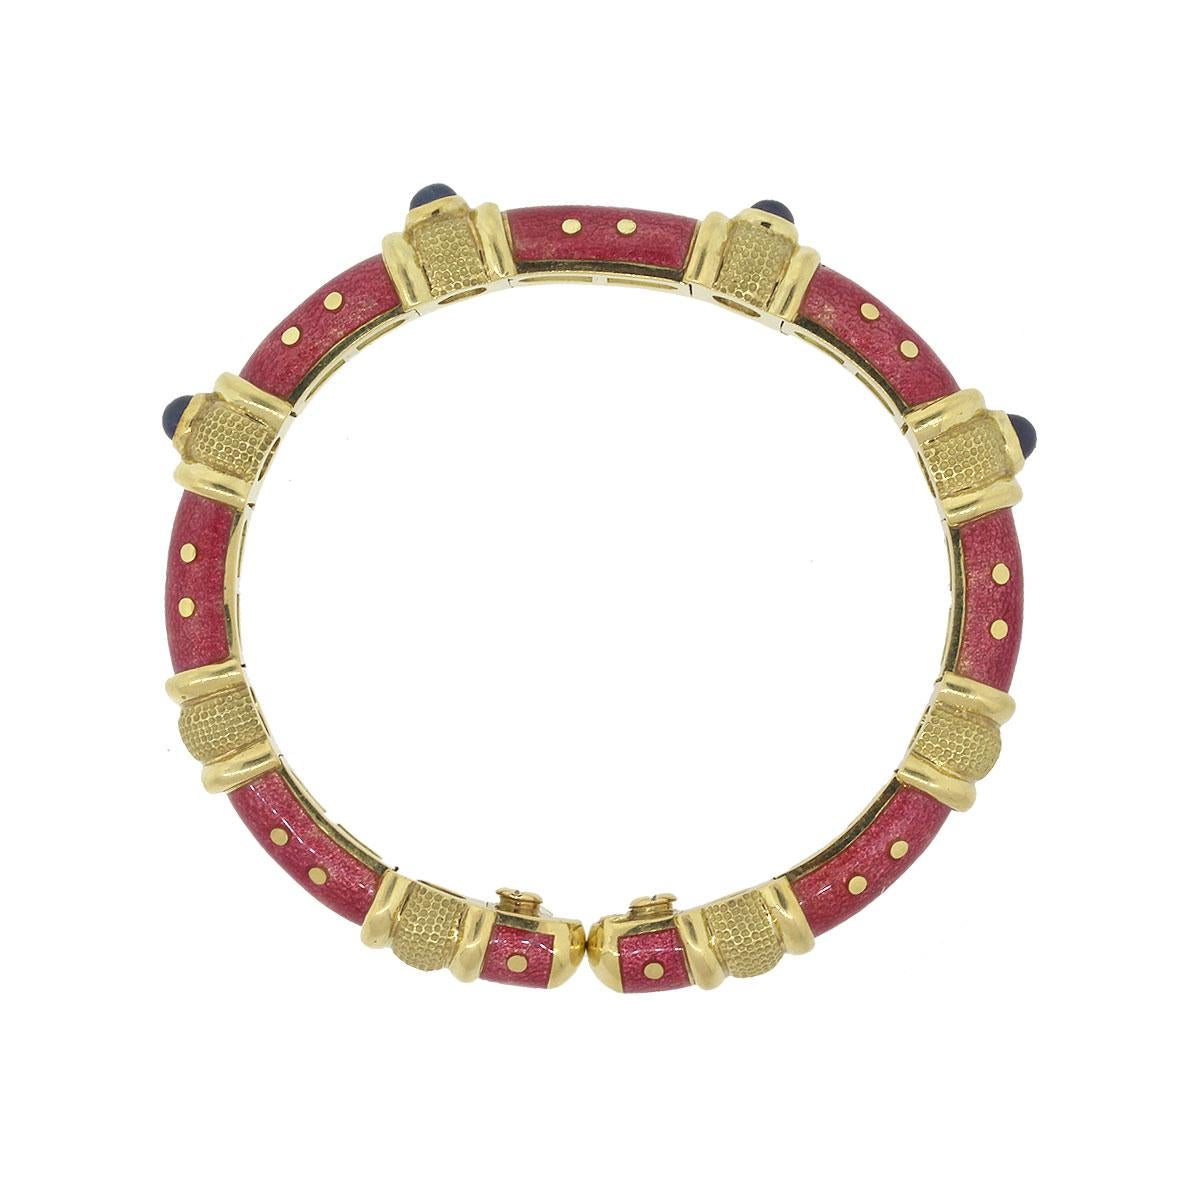 Material: 18k Yellow Gold
Gemstone details: Blue Sapphire Cabochons
Clasp: Open Cuff
Measurements: 2.55″ x 2.50″ x 0.30″
Total Weight: 56.9g (36.5dwt)
SKU: A30312363